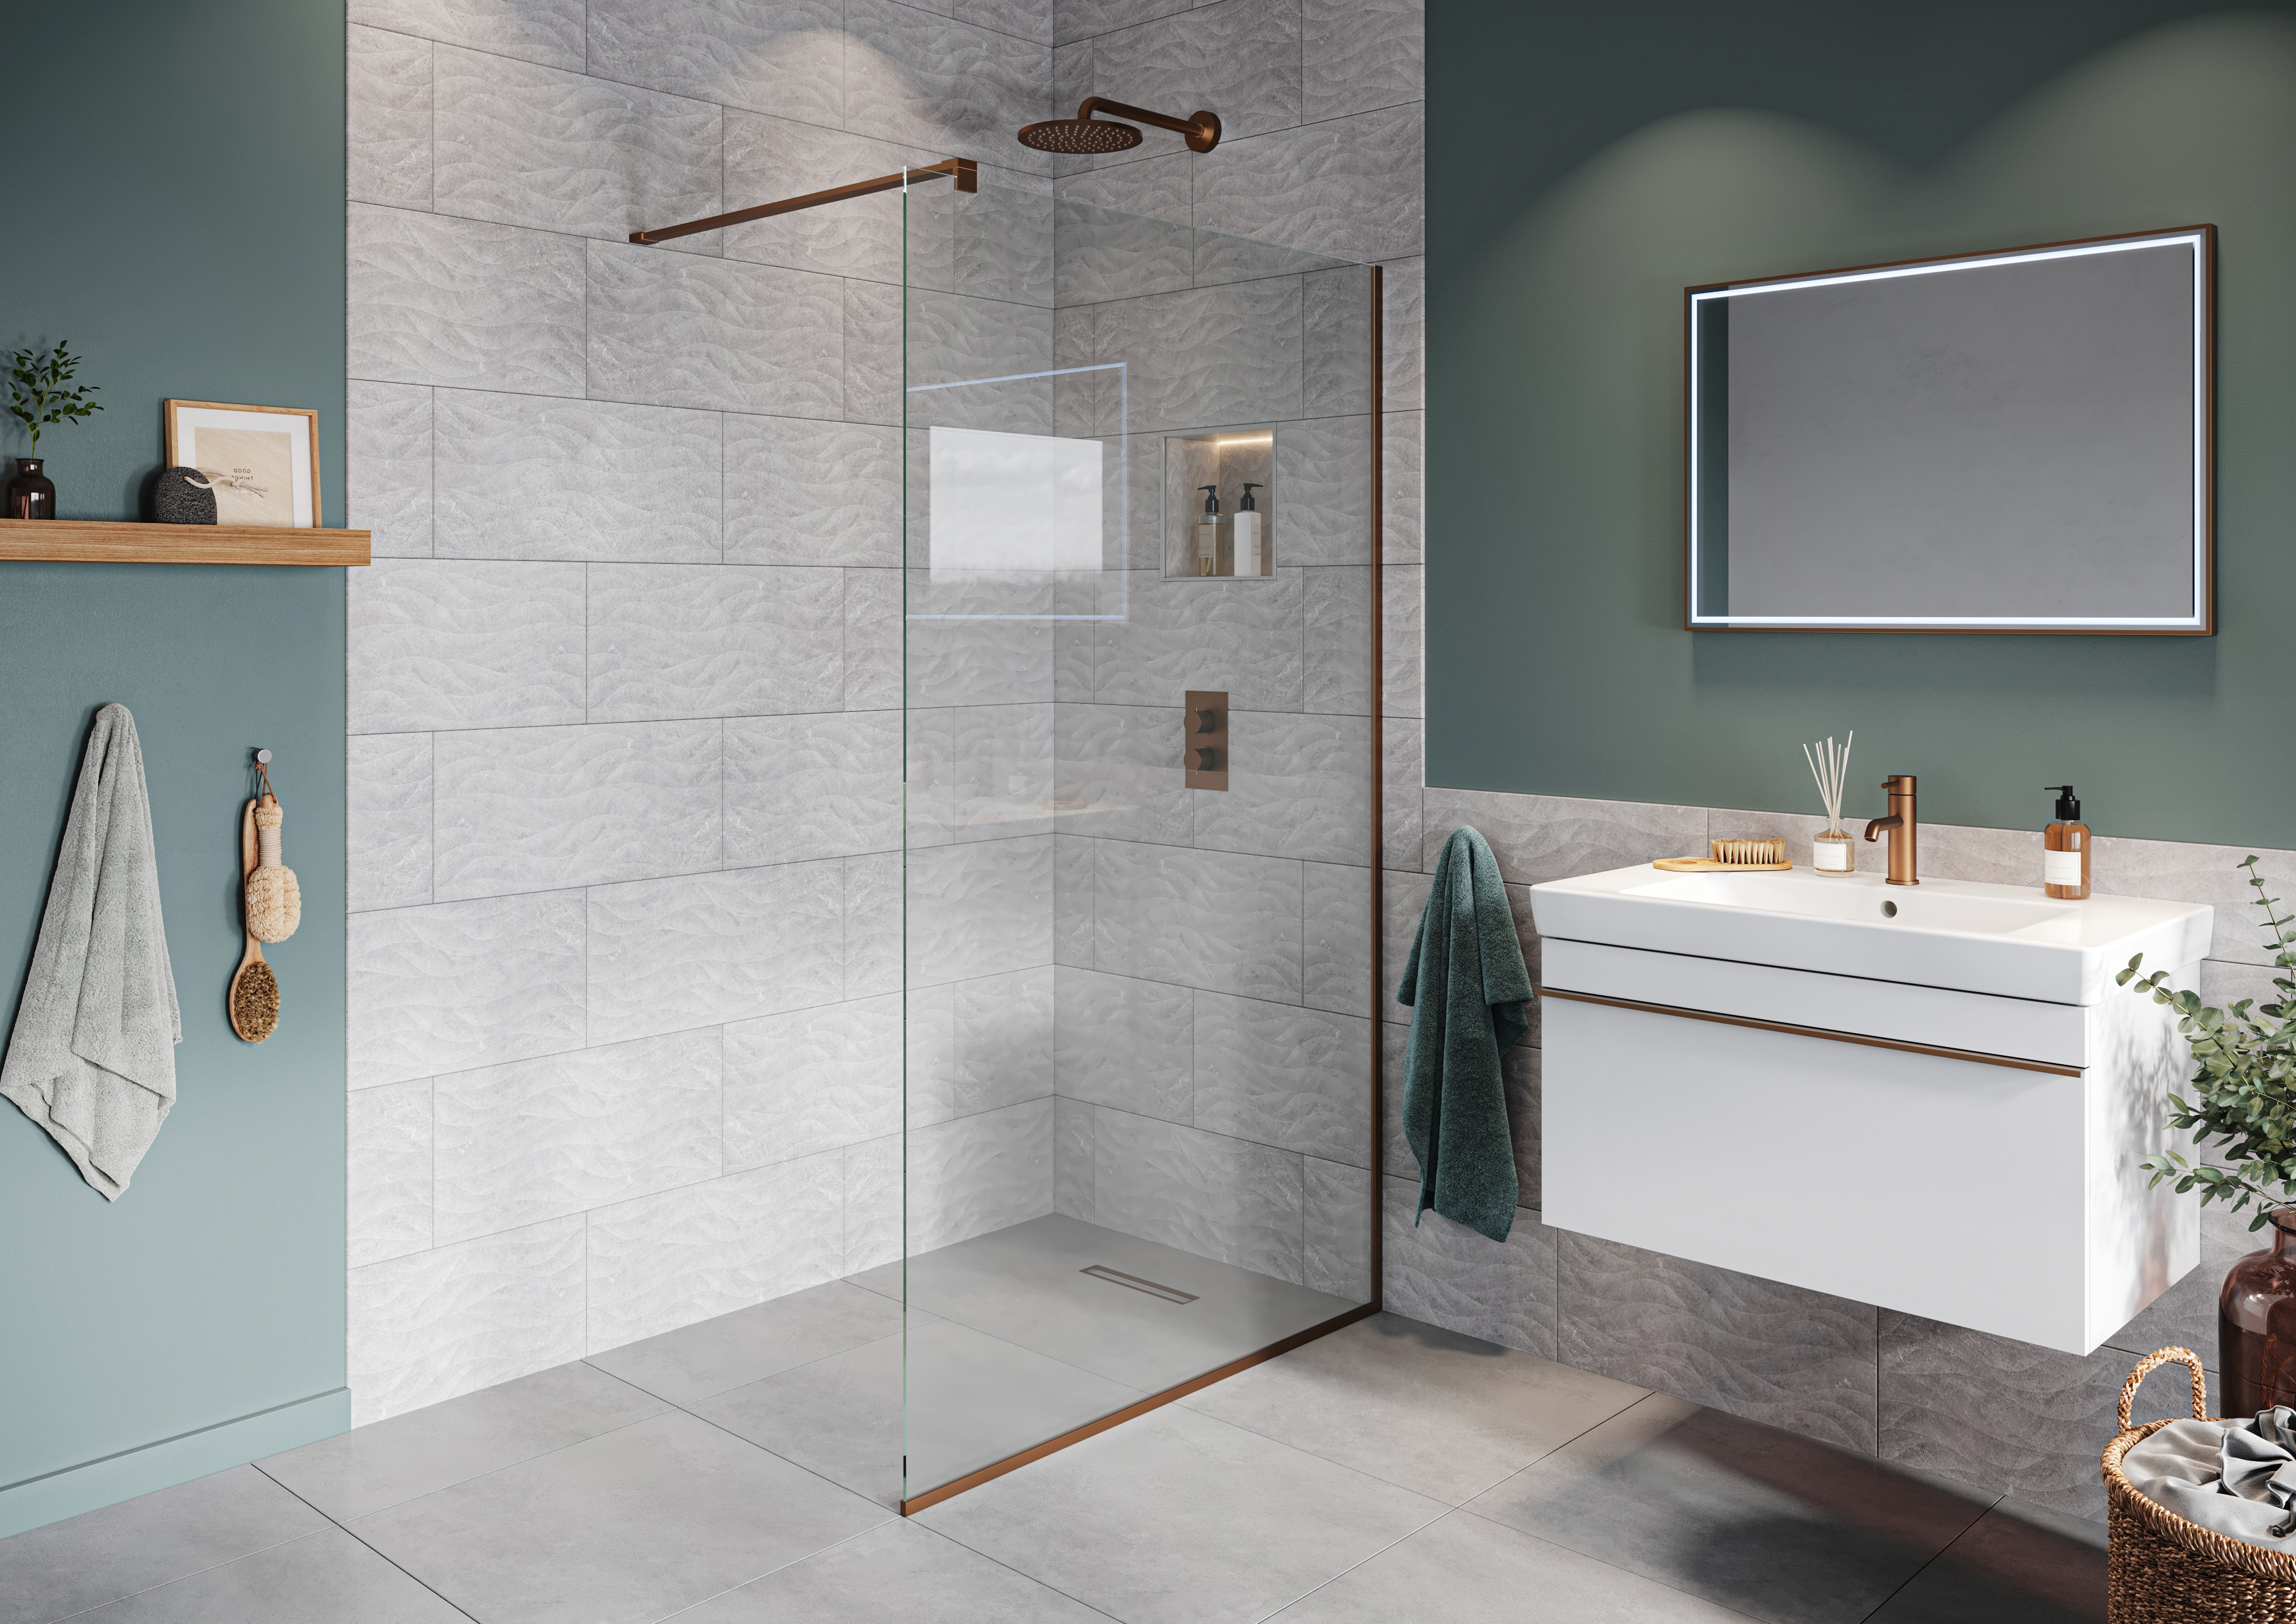 Hadleigh 8mm Brushed Bronze Frameless Wetroom Screen with Wall Arm - 1000mm